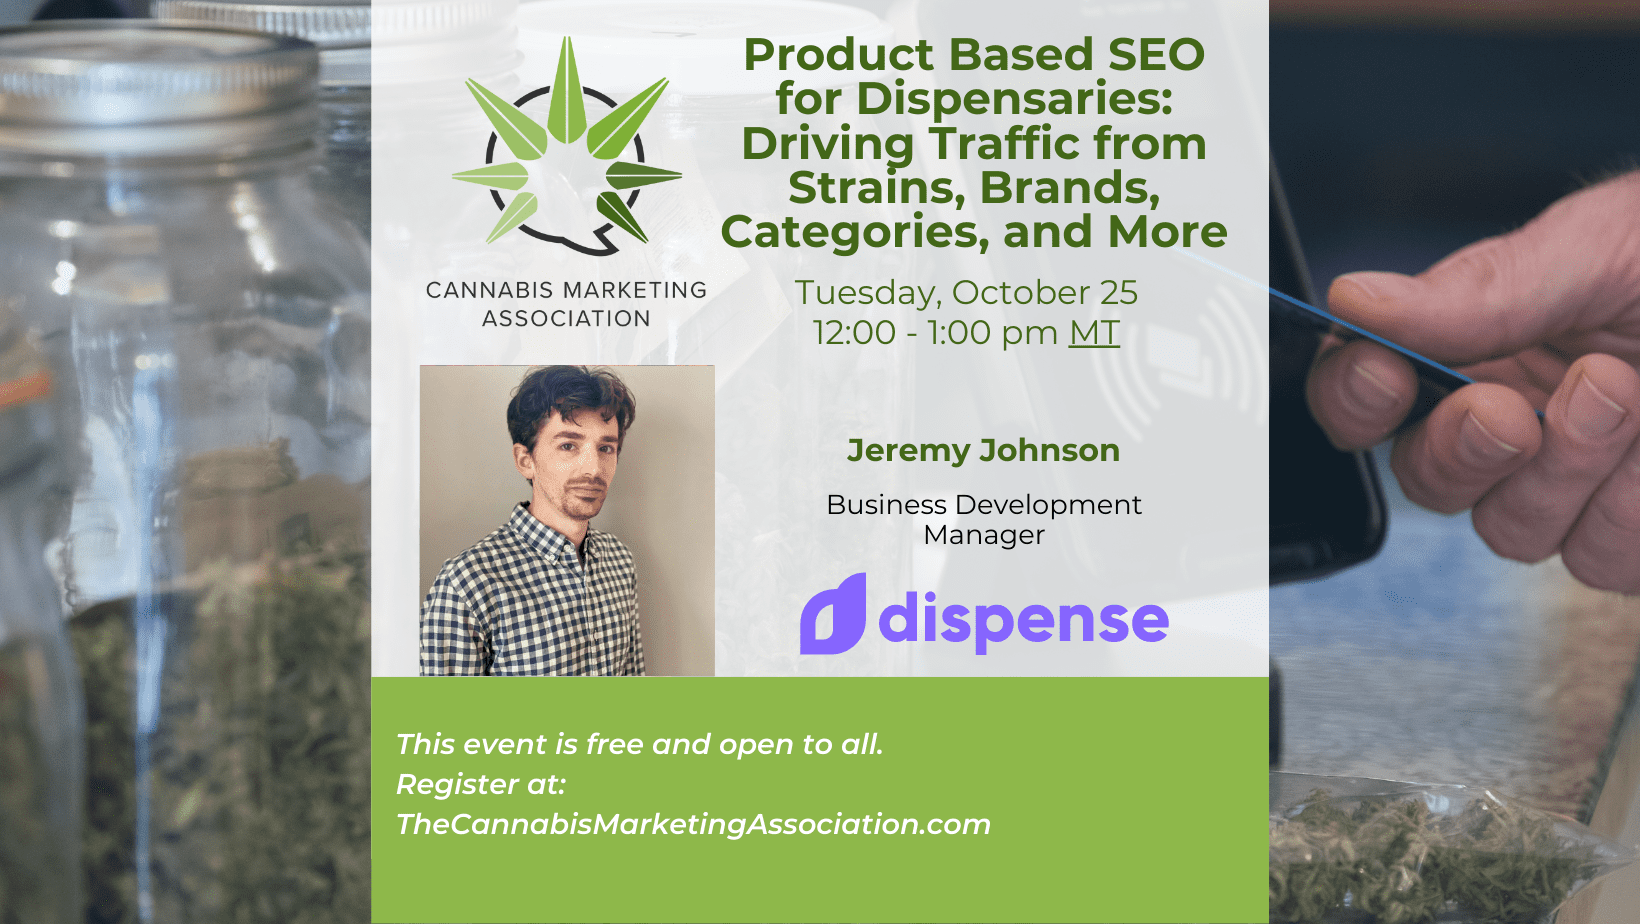 Product Based SEO for Dispensaries Driving Traffic from Strains, Brands, Categories, and More